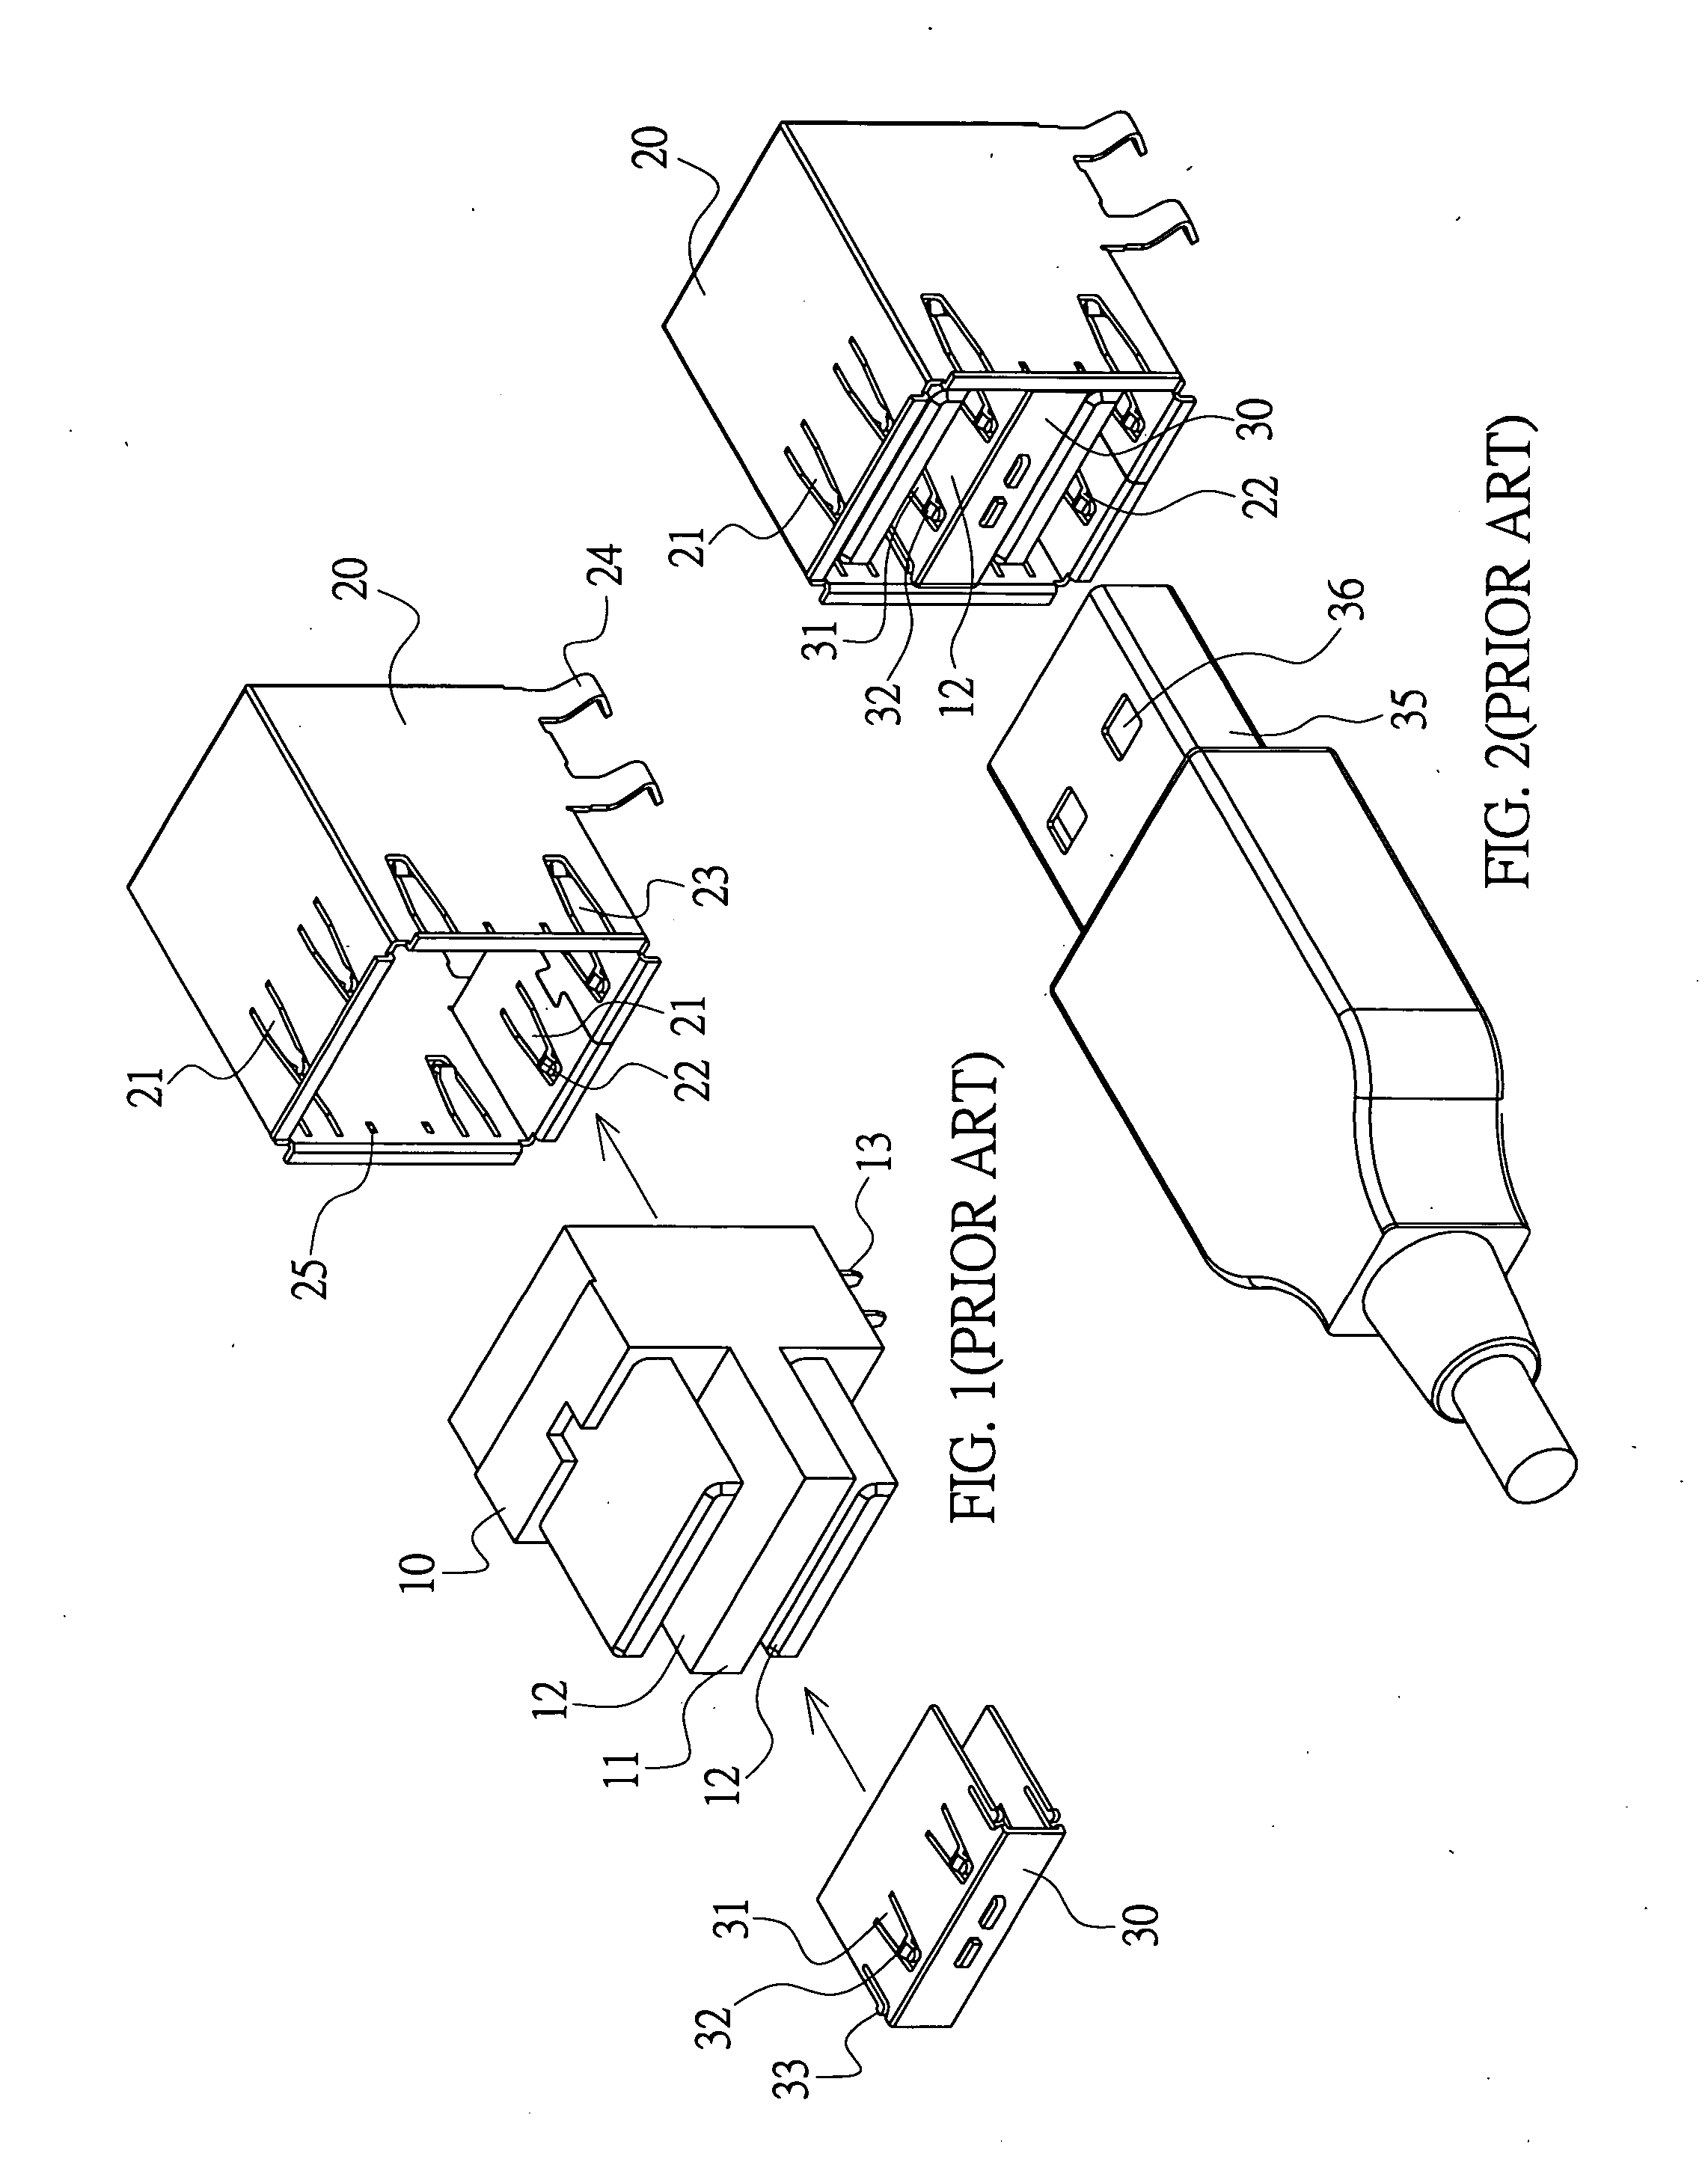 Electrical connector having an engaging element and a metal housing that pertain to different parts